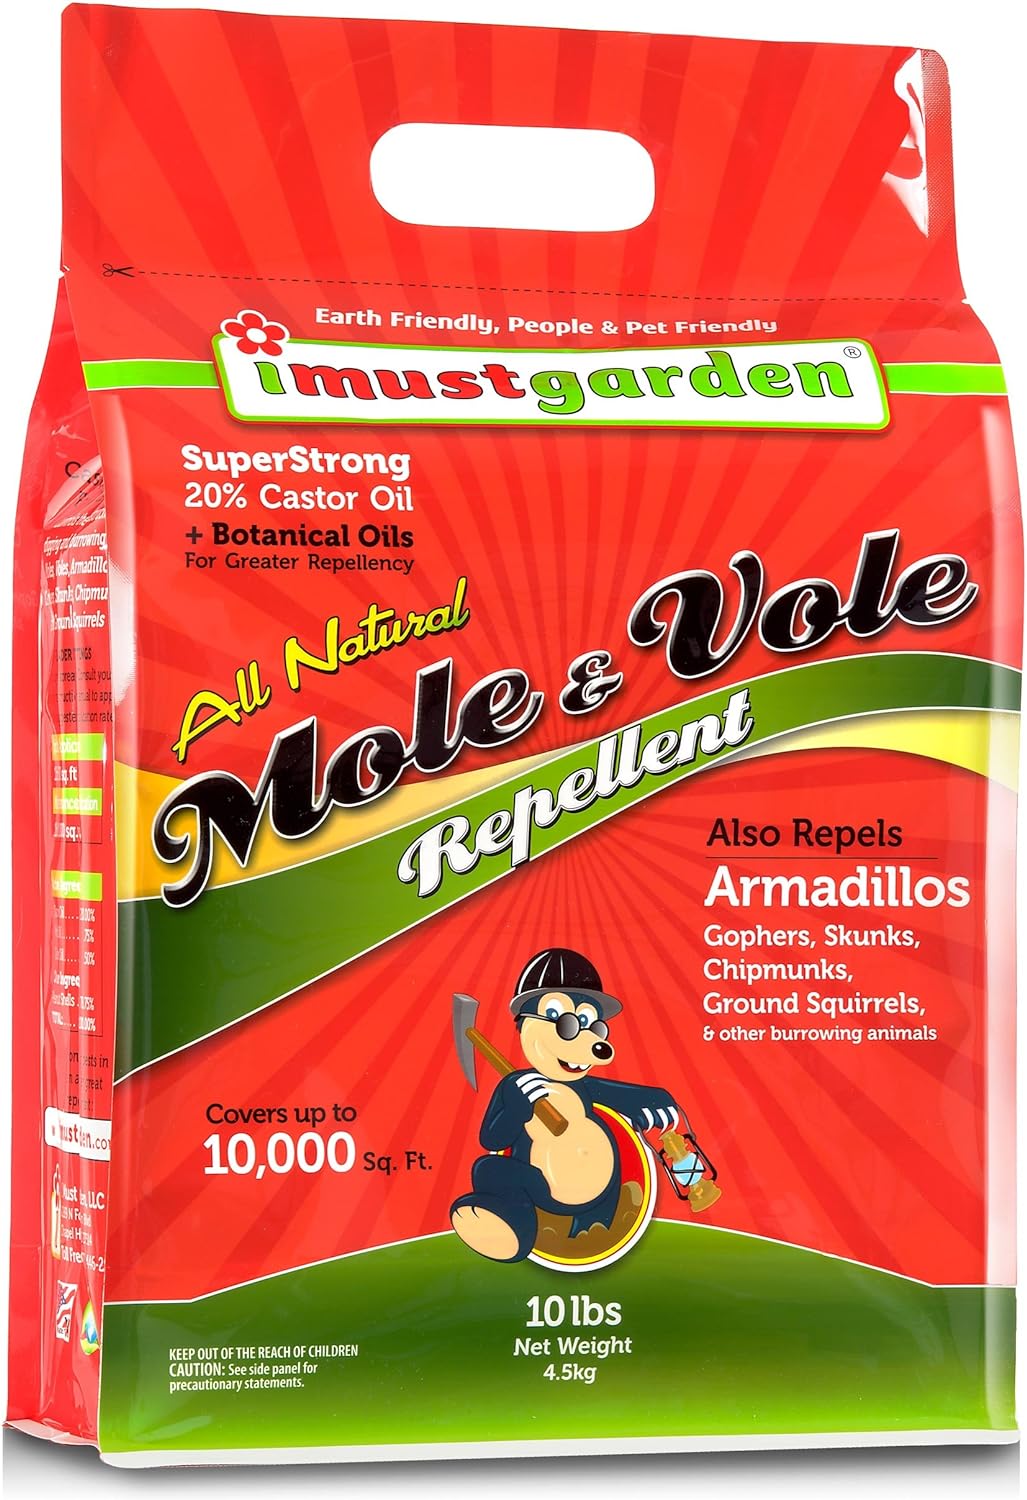 I Must Garden Mole & Vole Repellent- Professional Strength – Twice The Coverage – All Natural Ingredients - Pleasant Scent - 10lb - 1